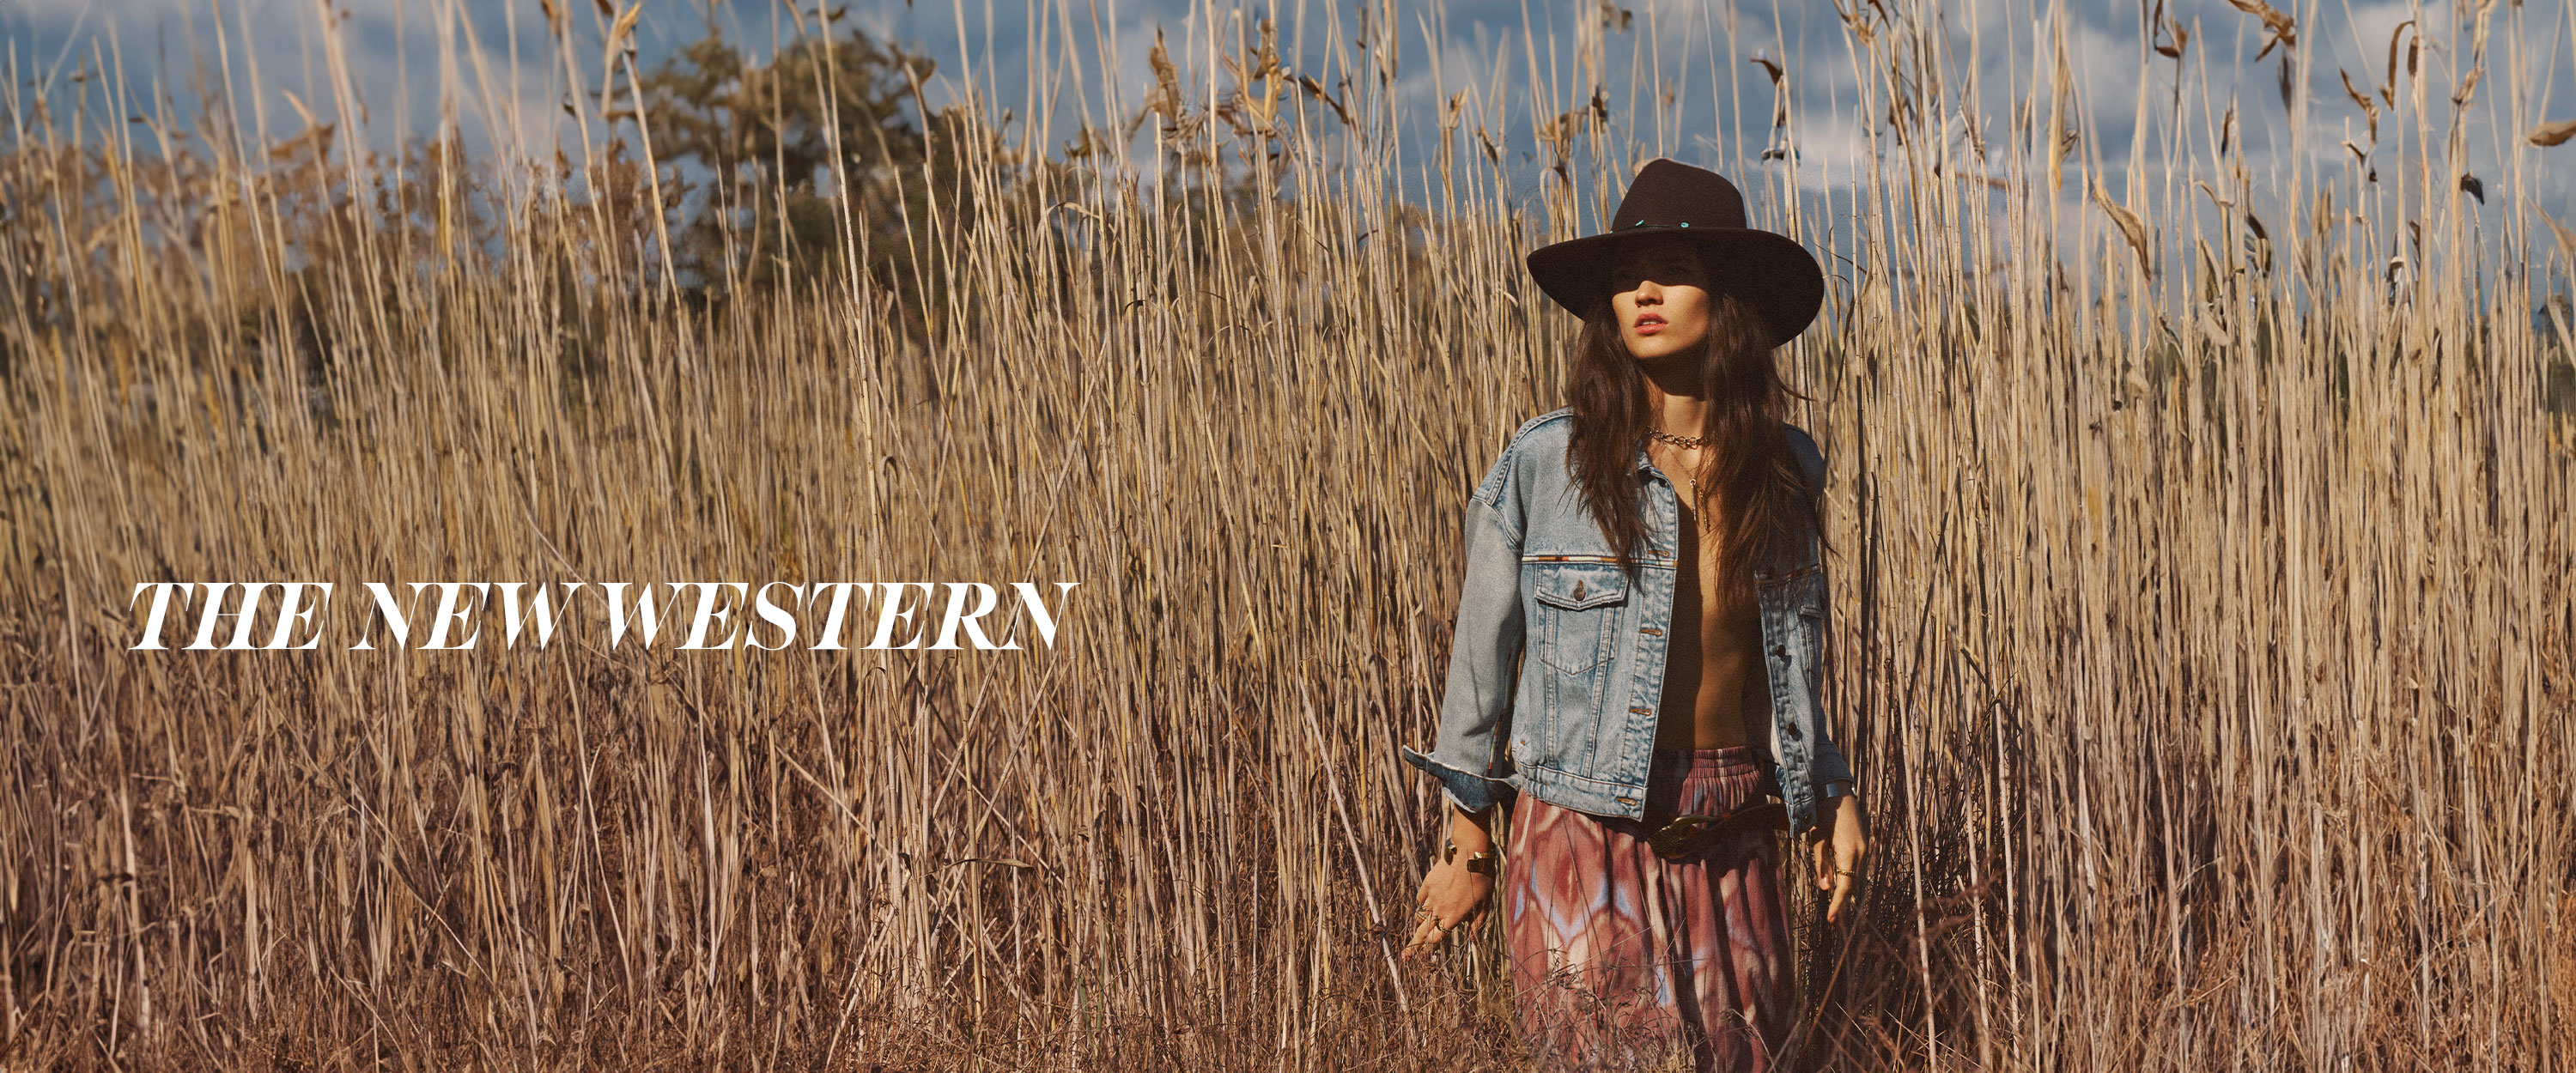 ba&sh new collection AW24, The new western. Denim jacket, printed dress and western hat